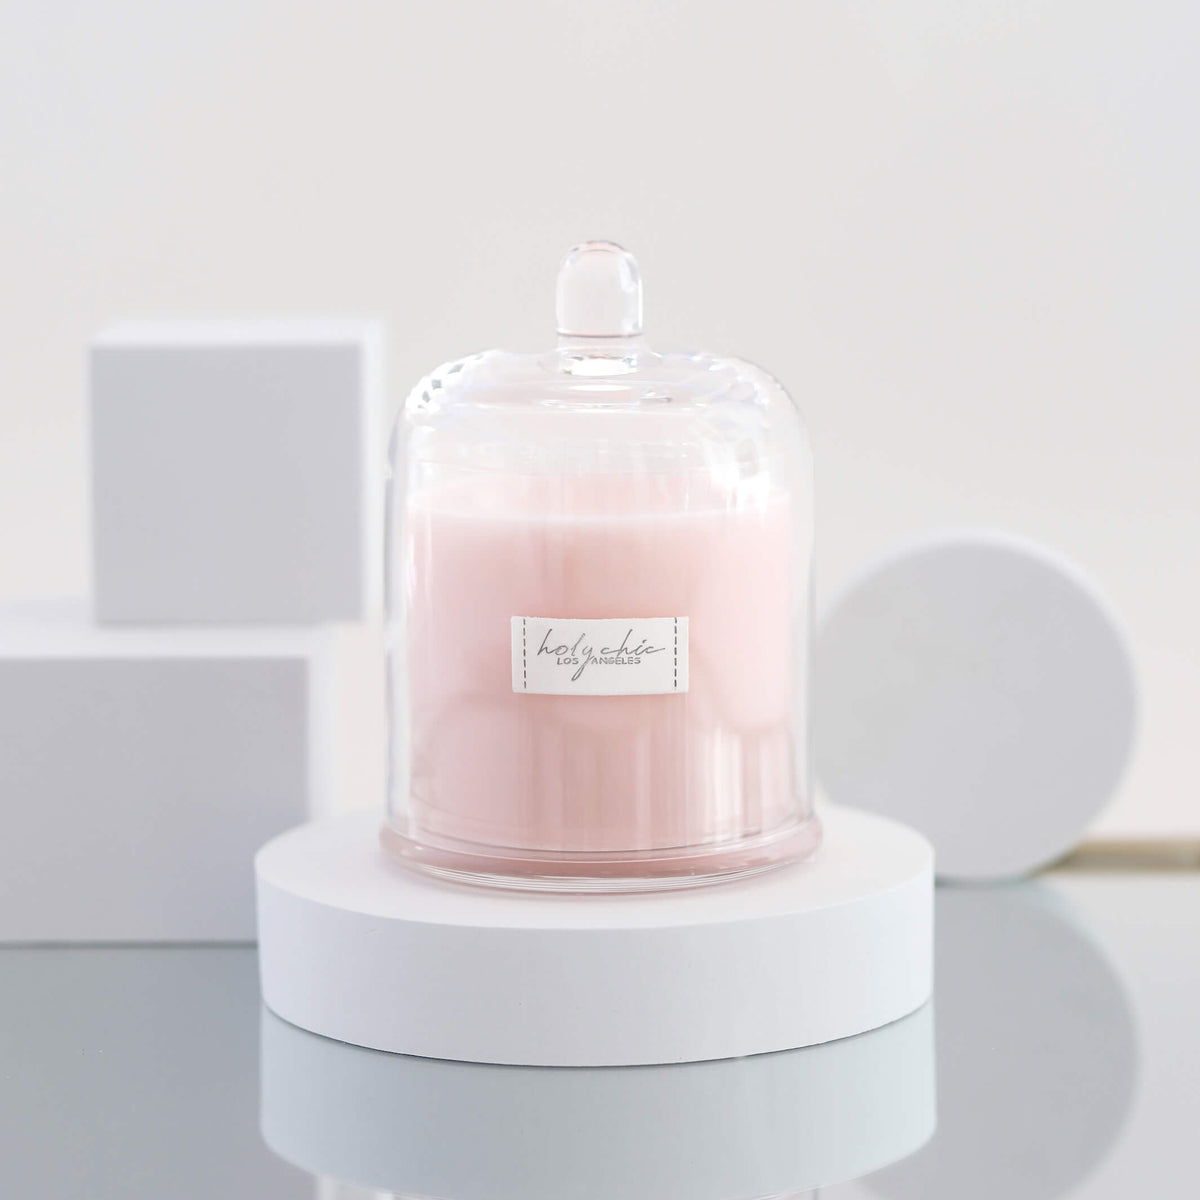 Pale pink scented candle in a clear glass container with a cloche